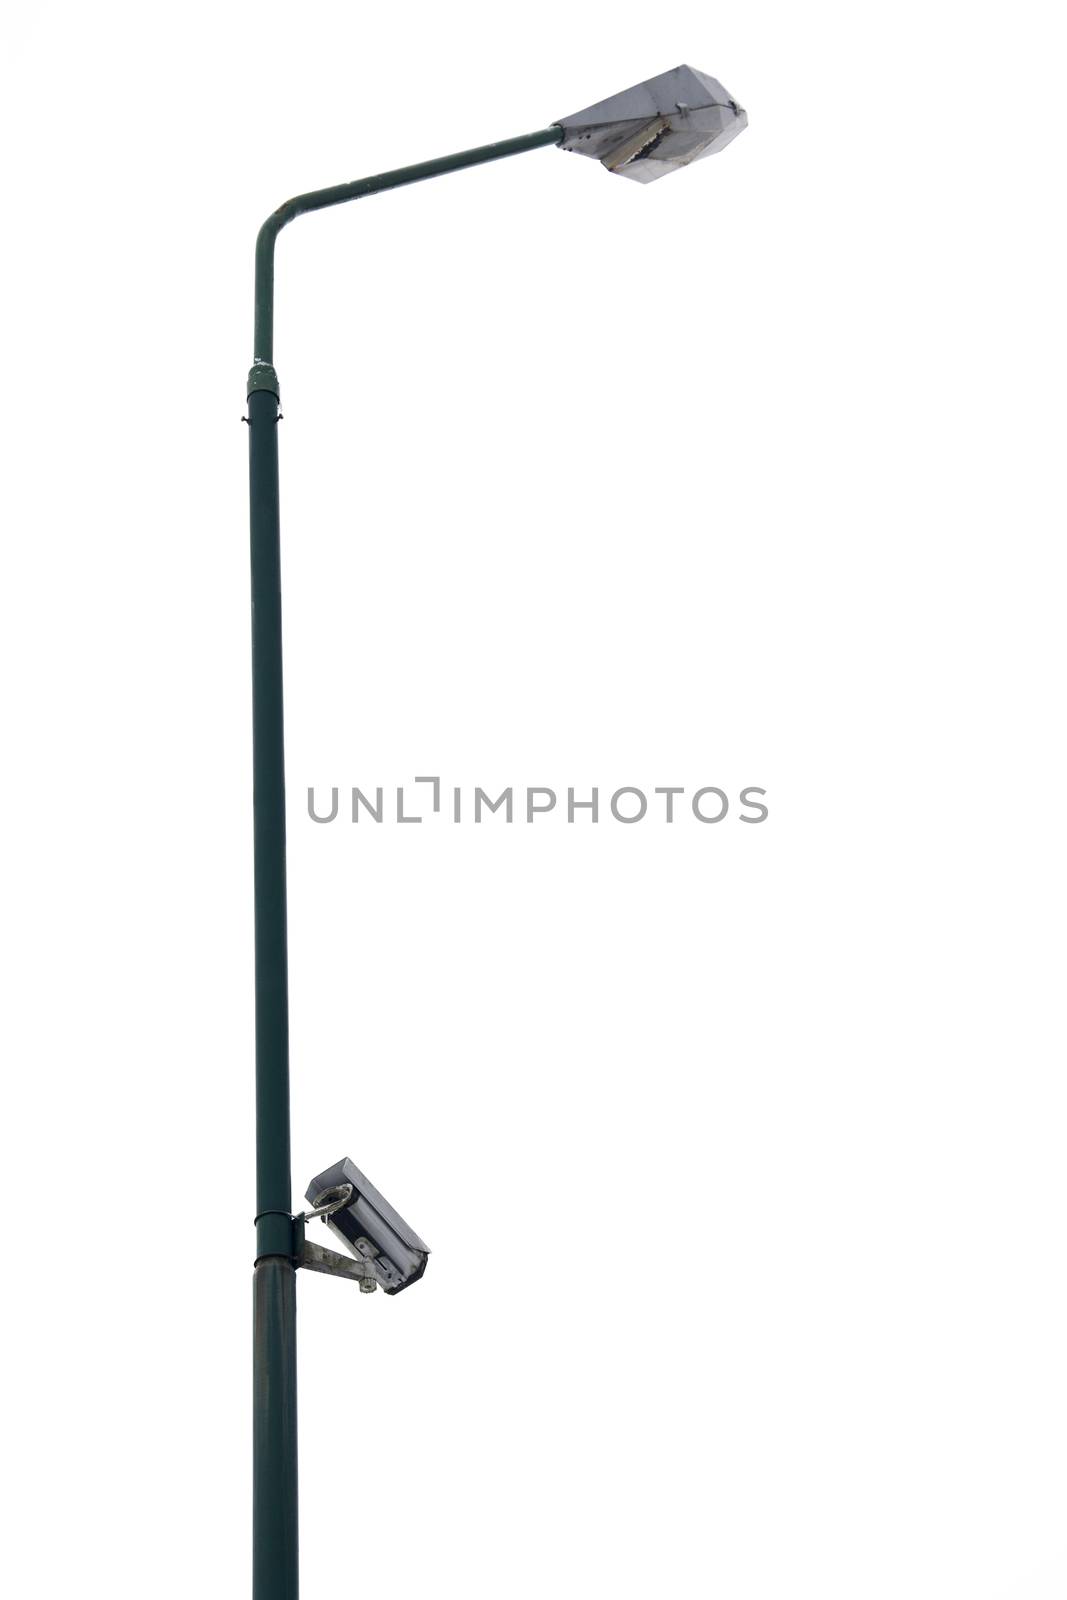 Security Surveillance Camera recording video of surrounding area isolated on white.